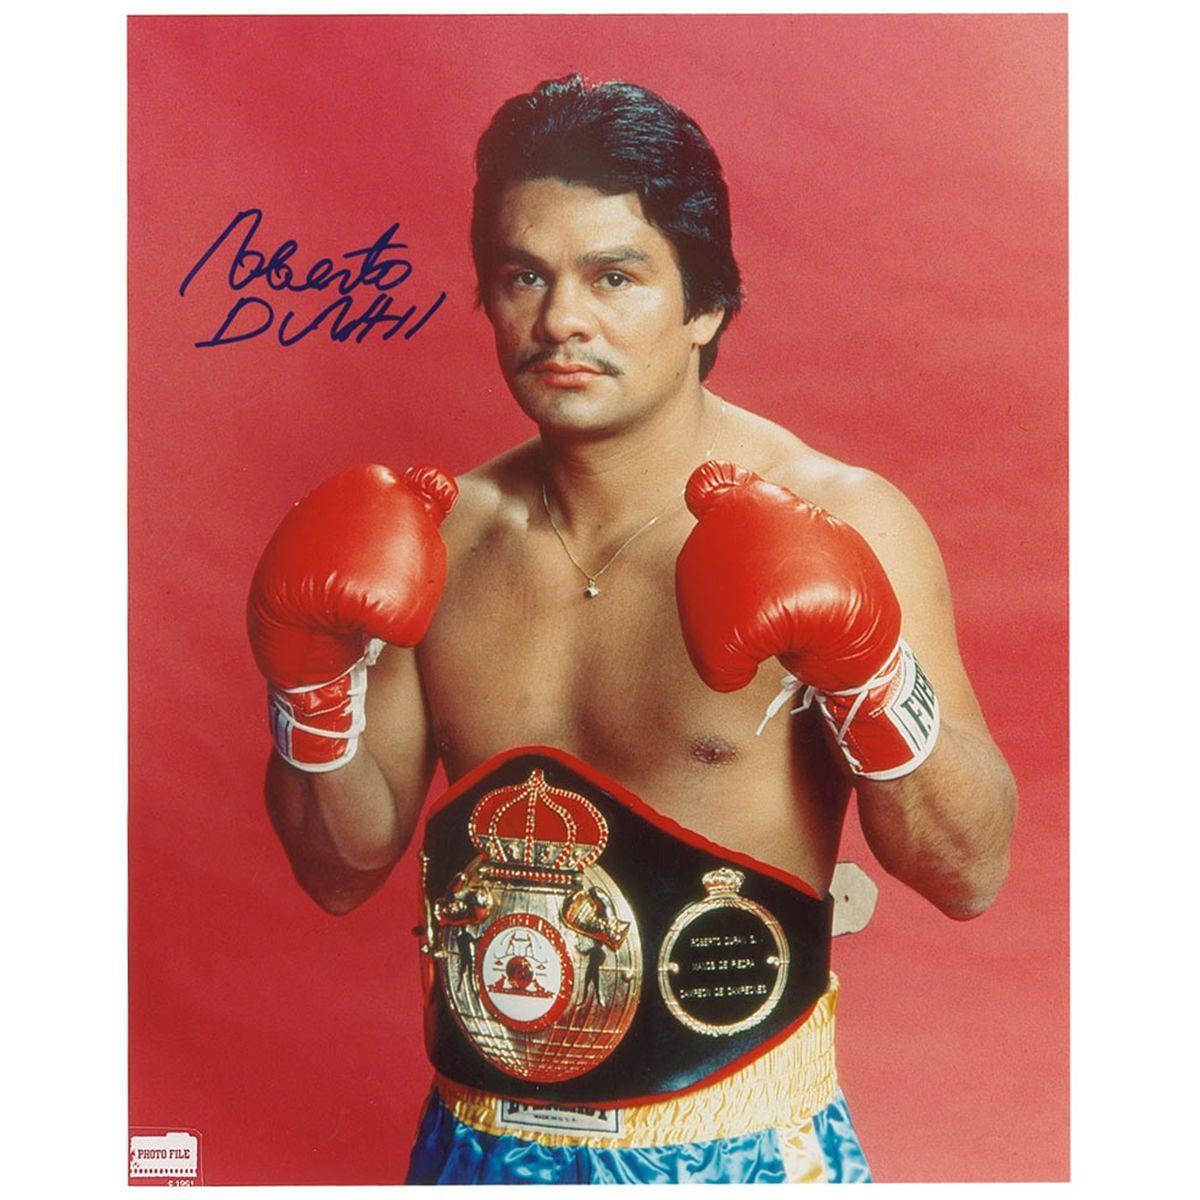 Danger Zone Boxing Talk - Roberto Duran Training routine: 6 days per week  Monday to Saturday Rest day Sunday 5am Roadwork : 6-10 Miles Gym work  begins at 2pm His routine included